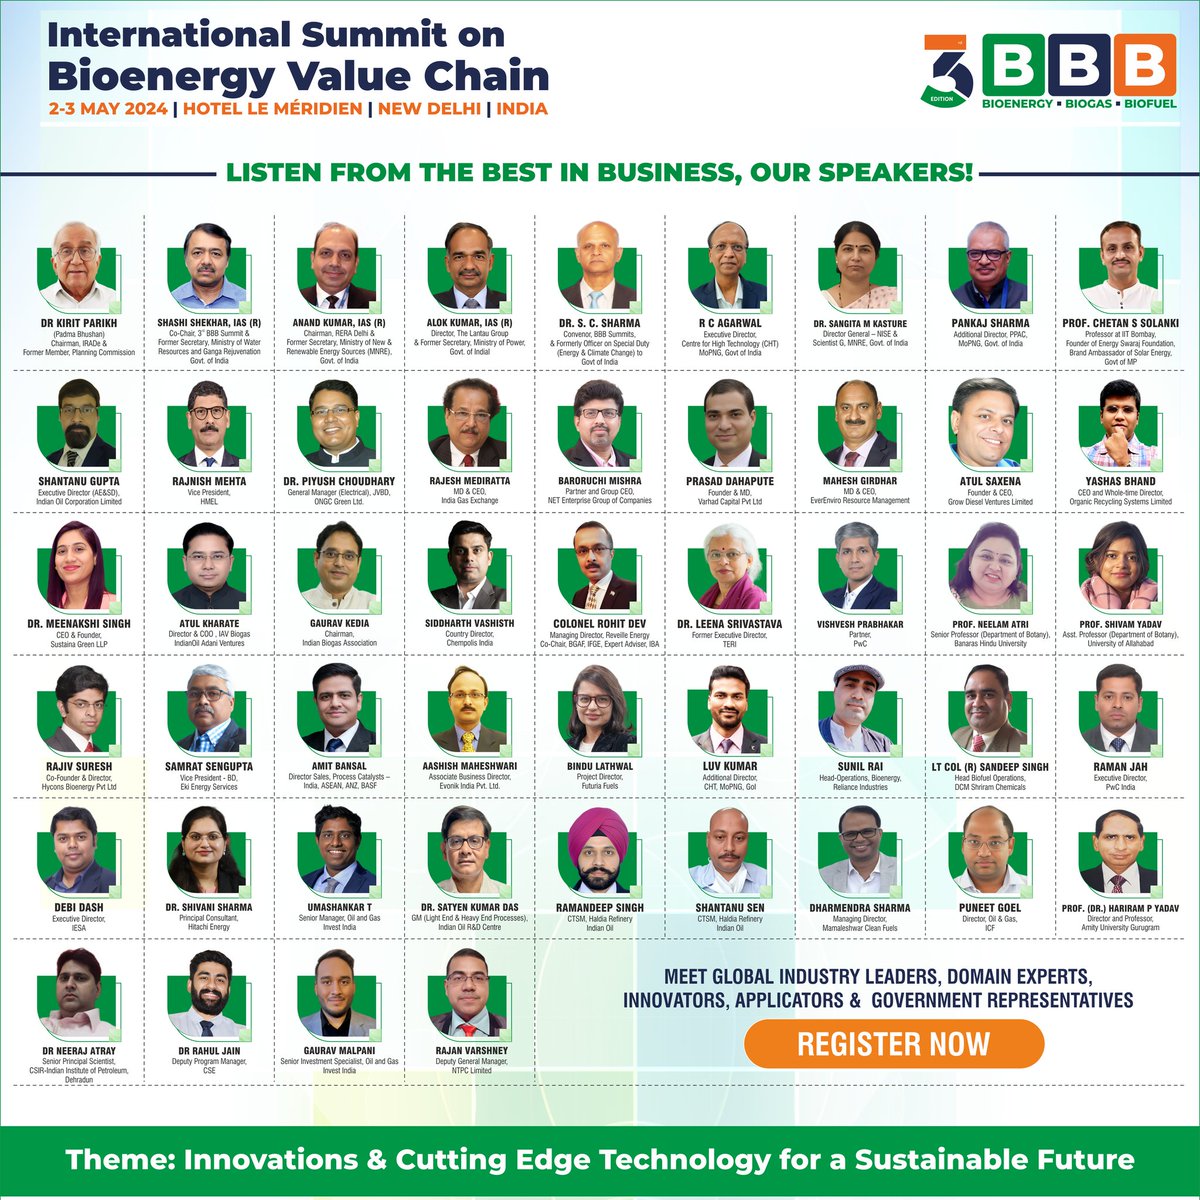 Bharat has accelerated its Energy Transition towards #NetZero2070 with much focus on Bioenergy including Biofuels

This Sunrise Renewable Energy Sector seeks due focus and offers ample opportunities in R&D, Technology, Logistics, Manufacturing and more

@bbbsummits is organising